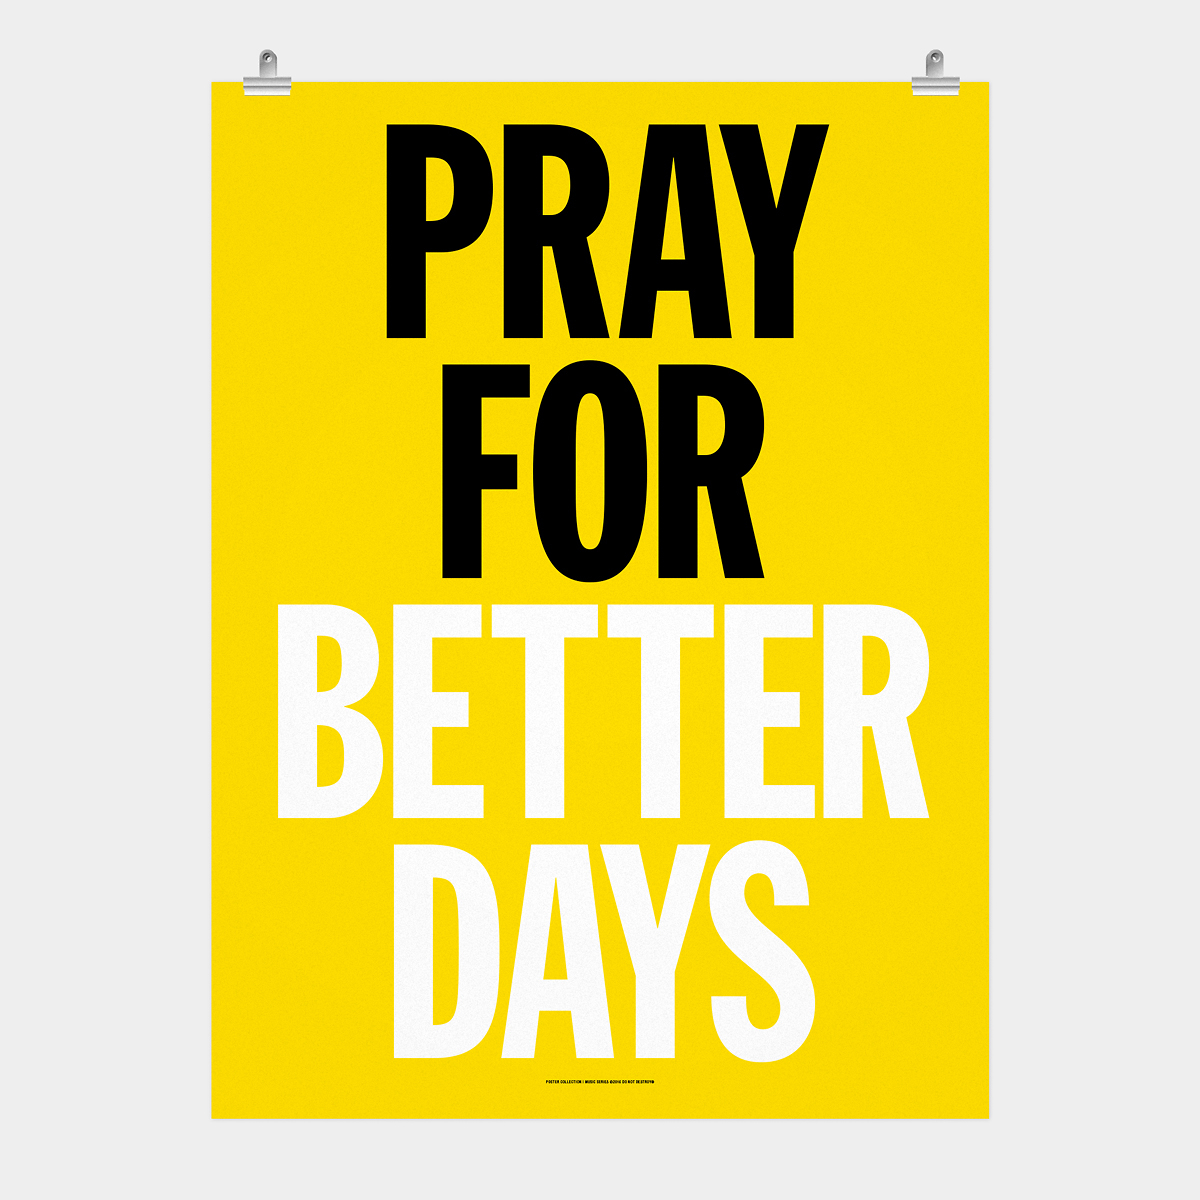 2pac better days poster